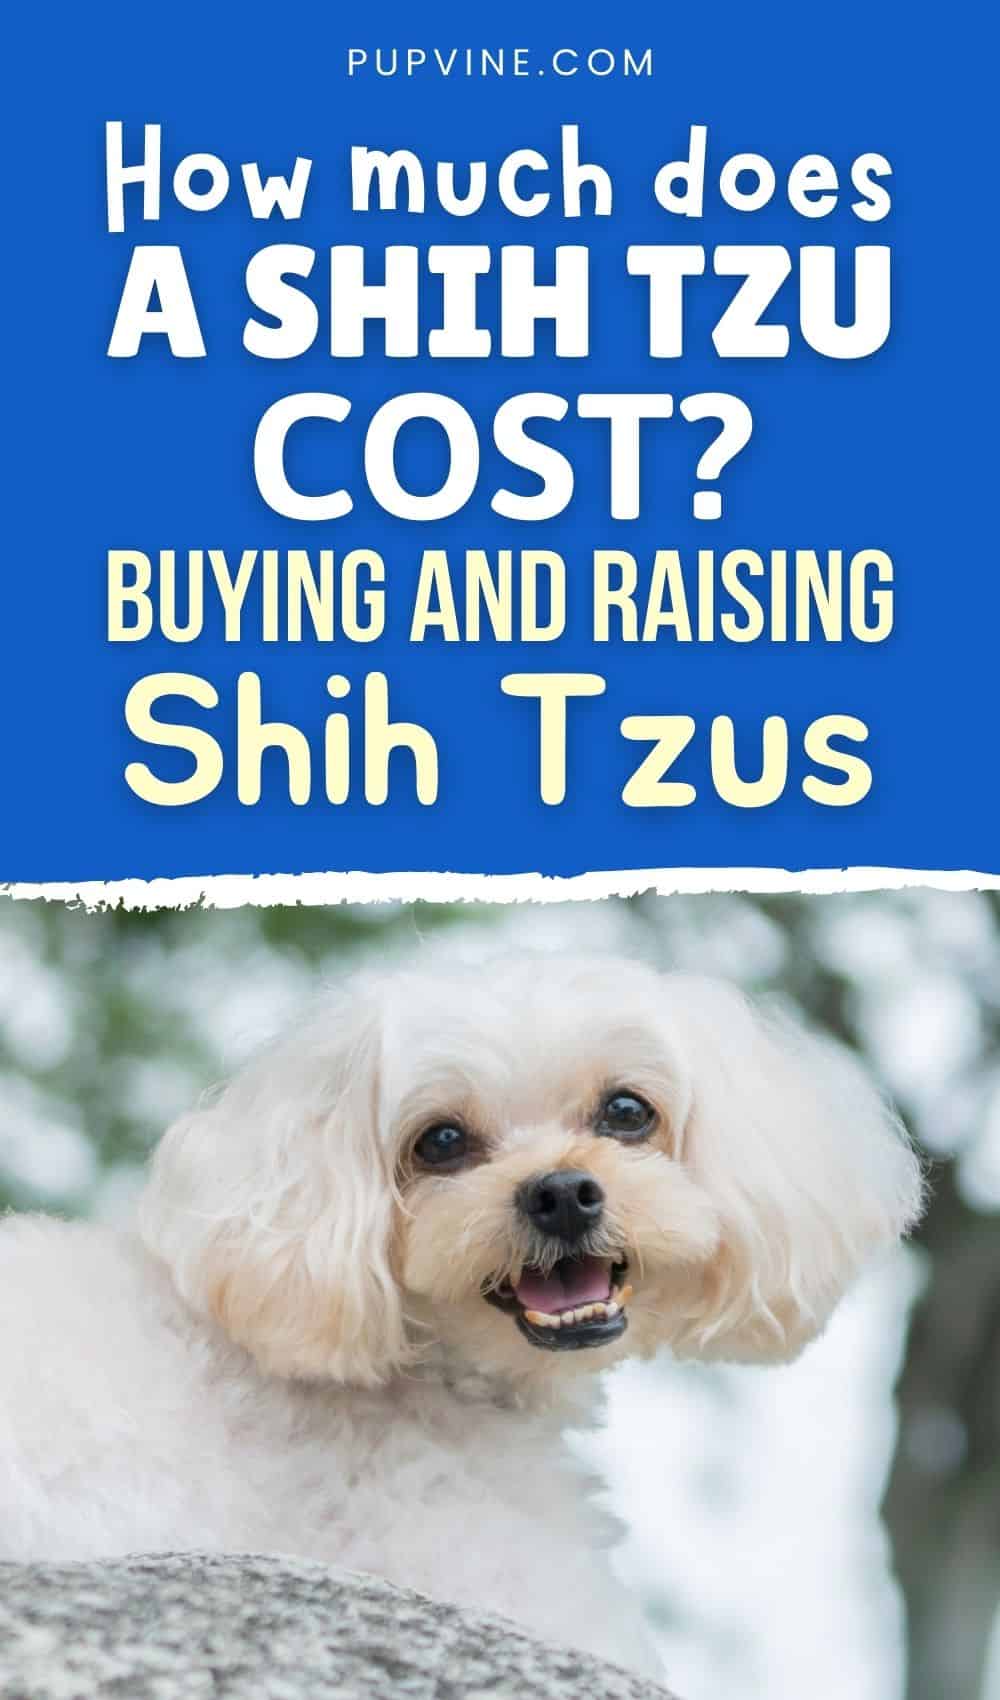 How Much Does A Shih Tzu Cost Buying And Raising Shih Tzus